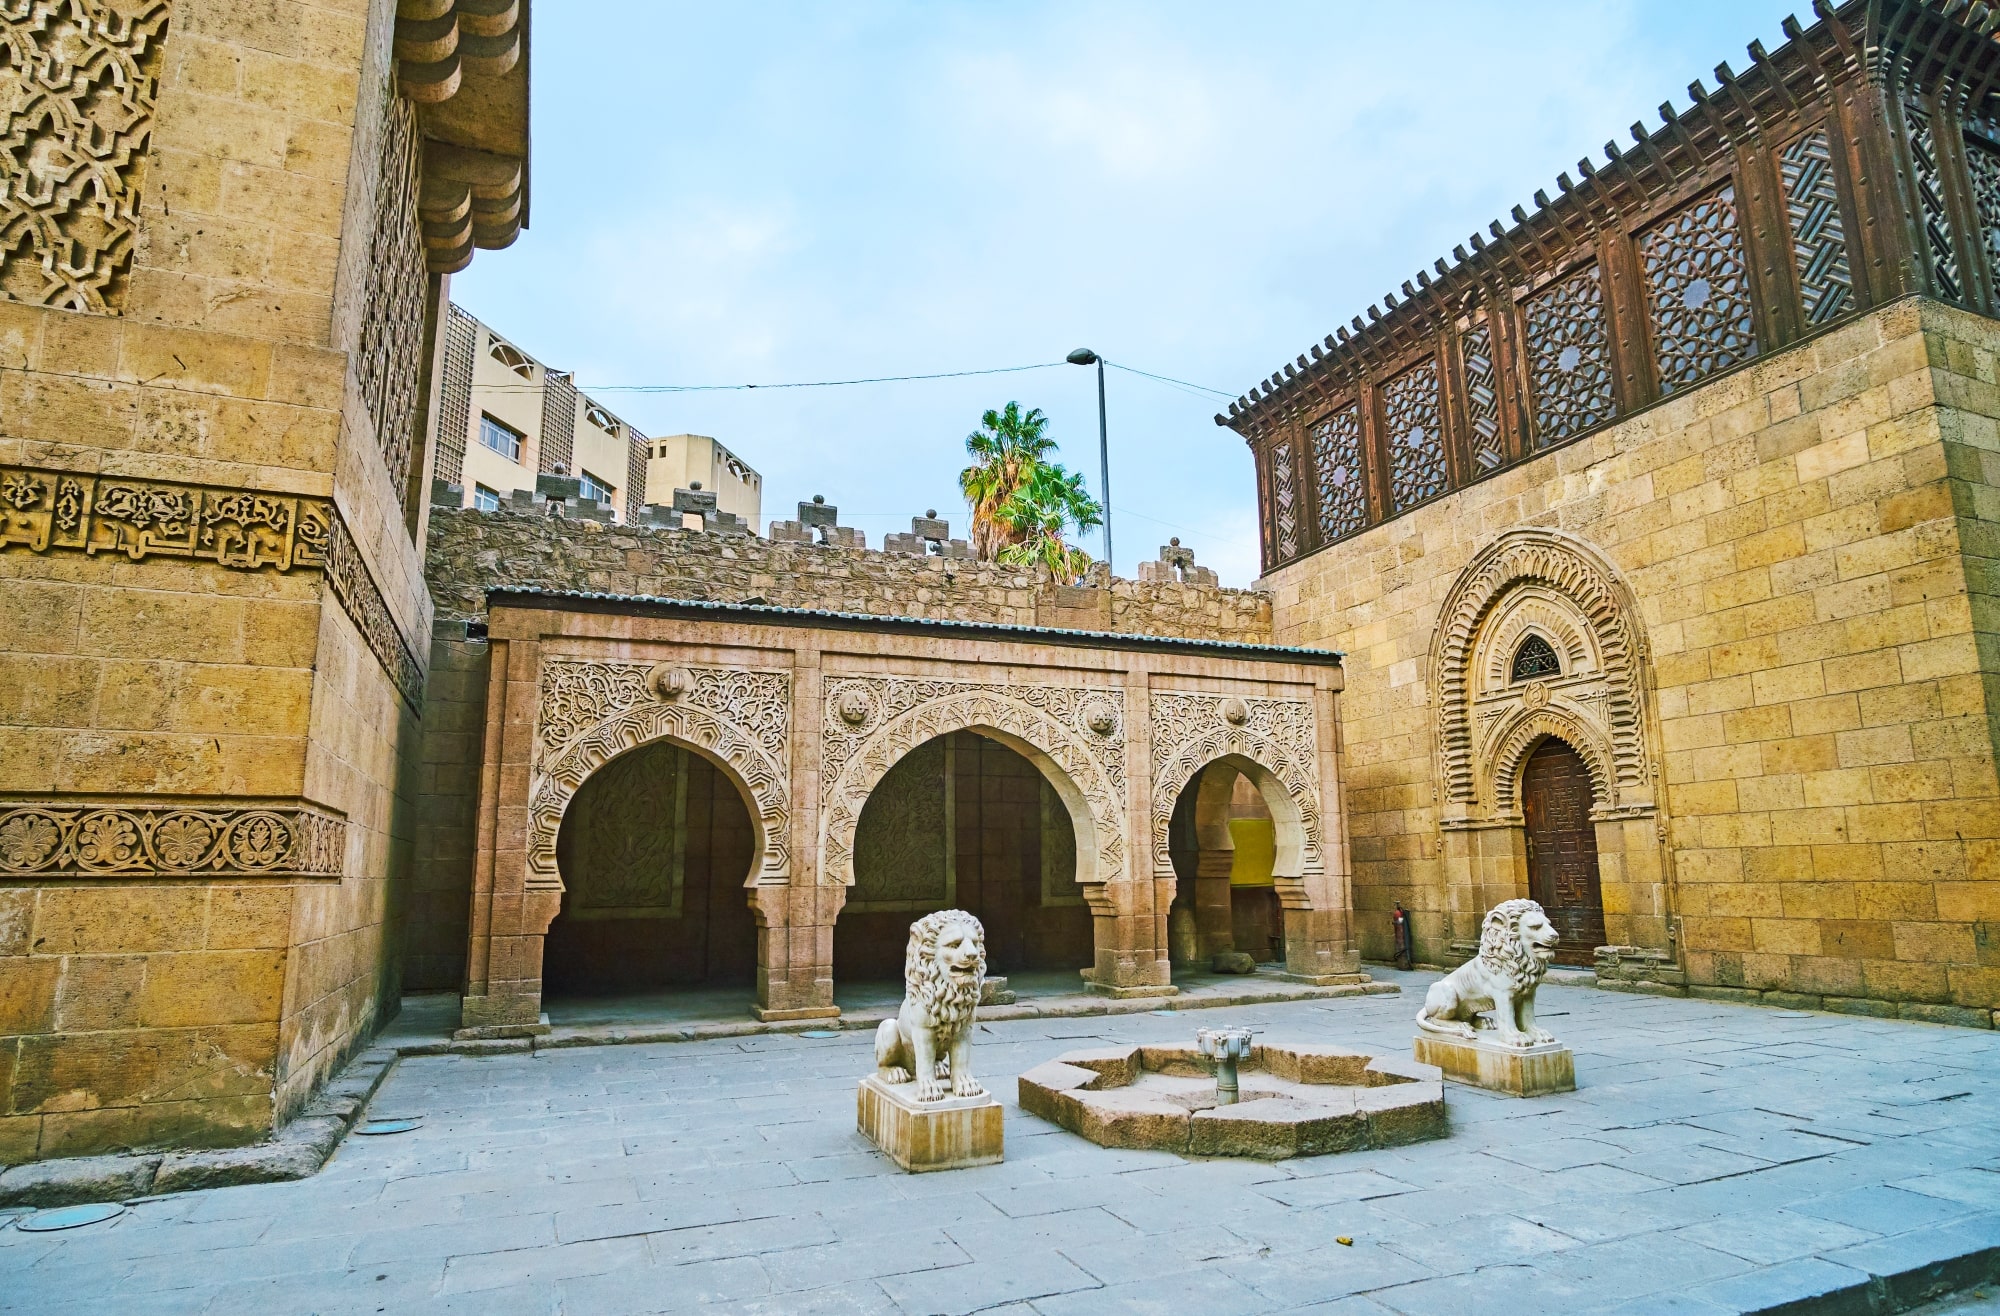 The fountain at the Manial Palace mosque, Cairo, Egypt